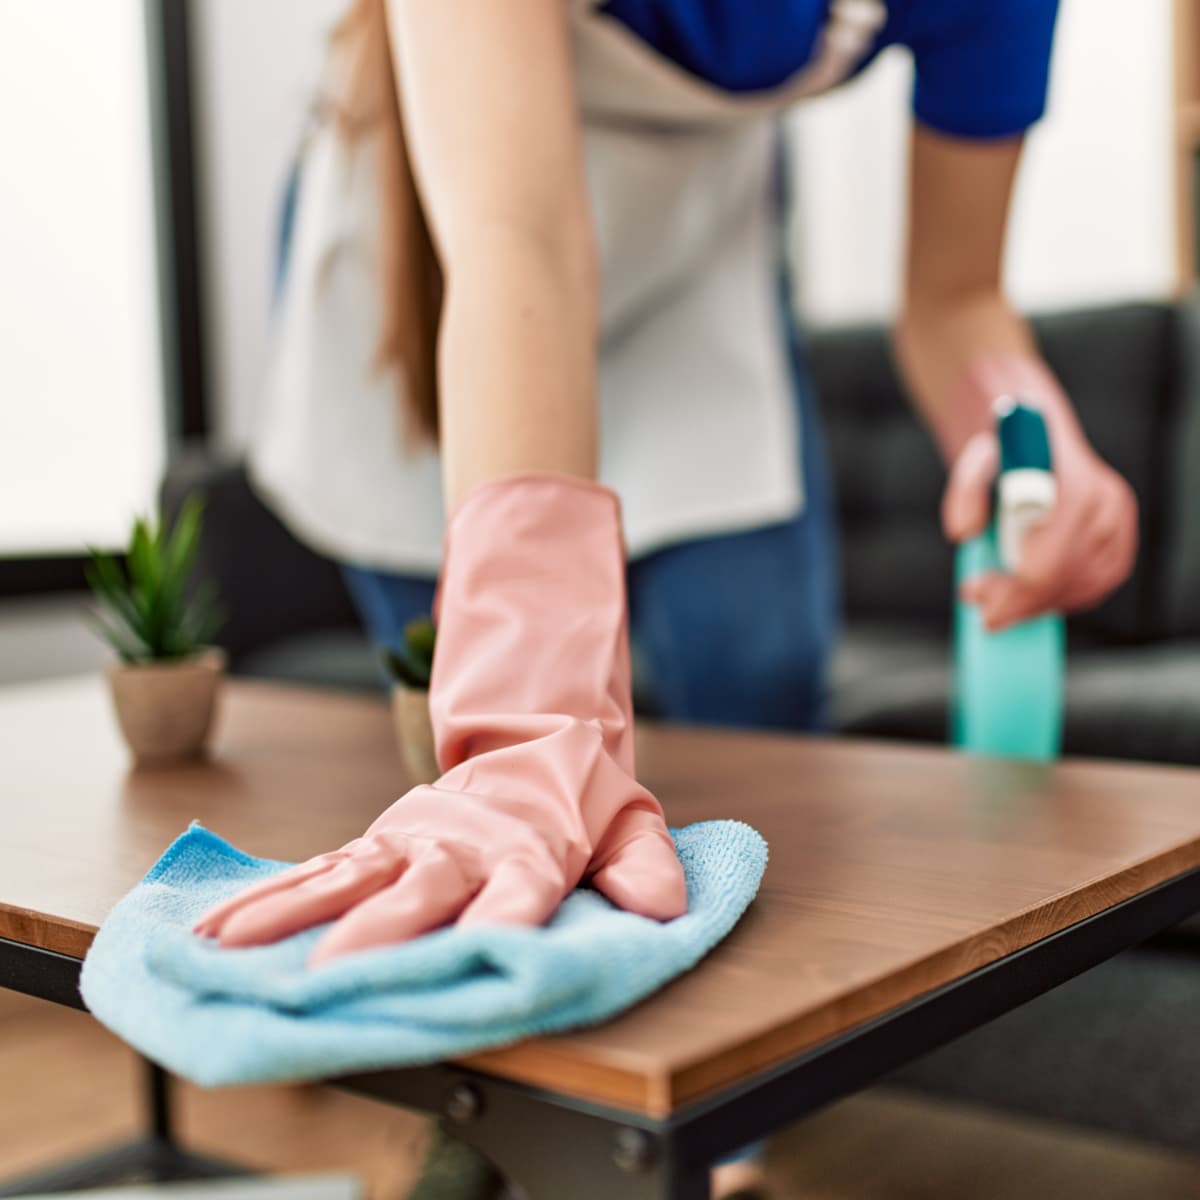 Close up of woman cleaning a table.